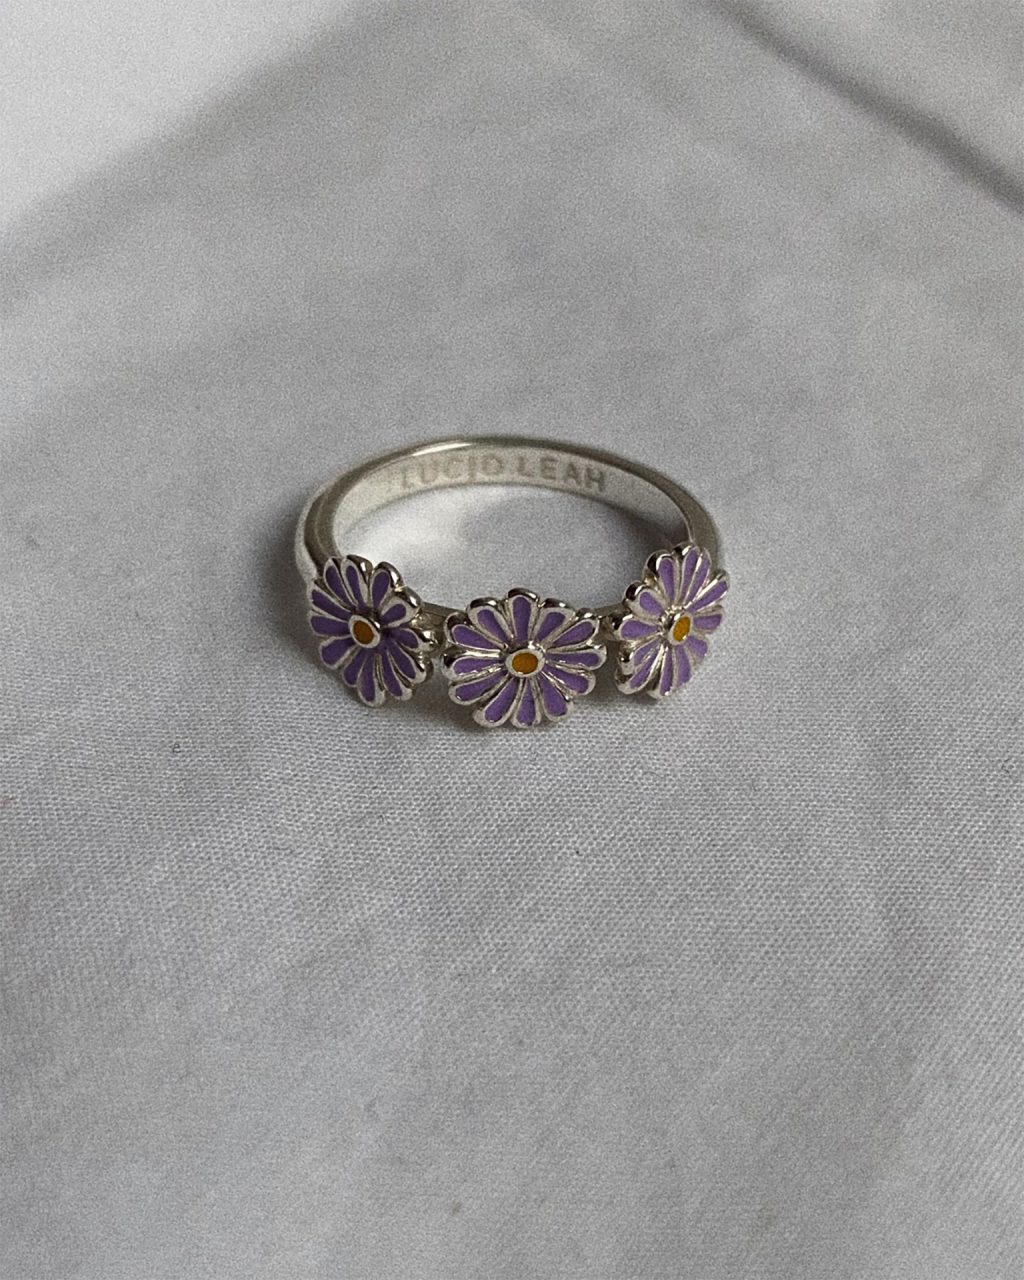 Daisy ring in 100% certified recycled sterling silver